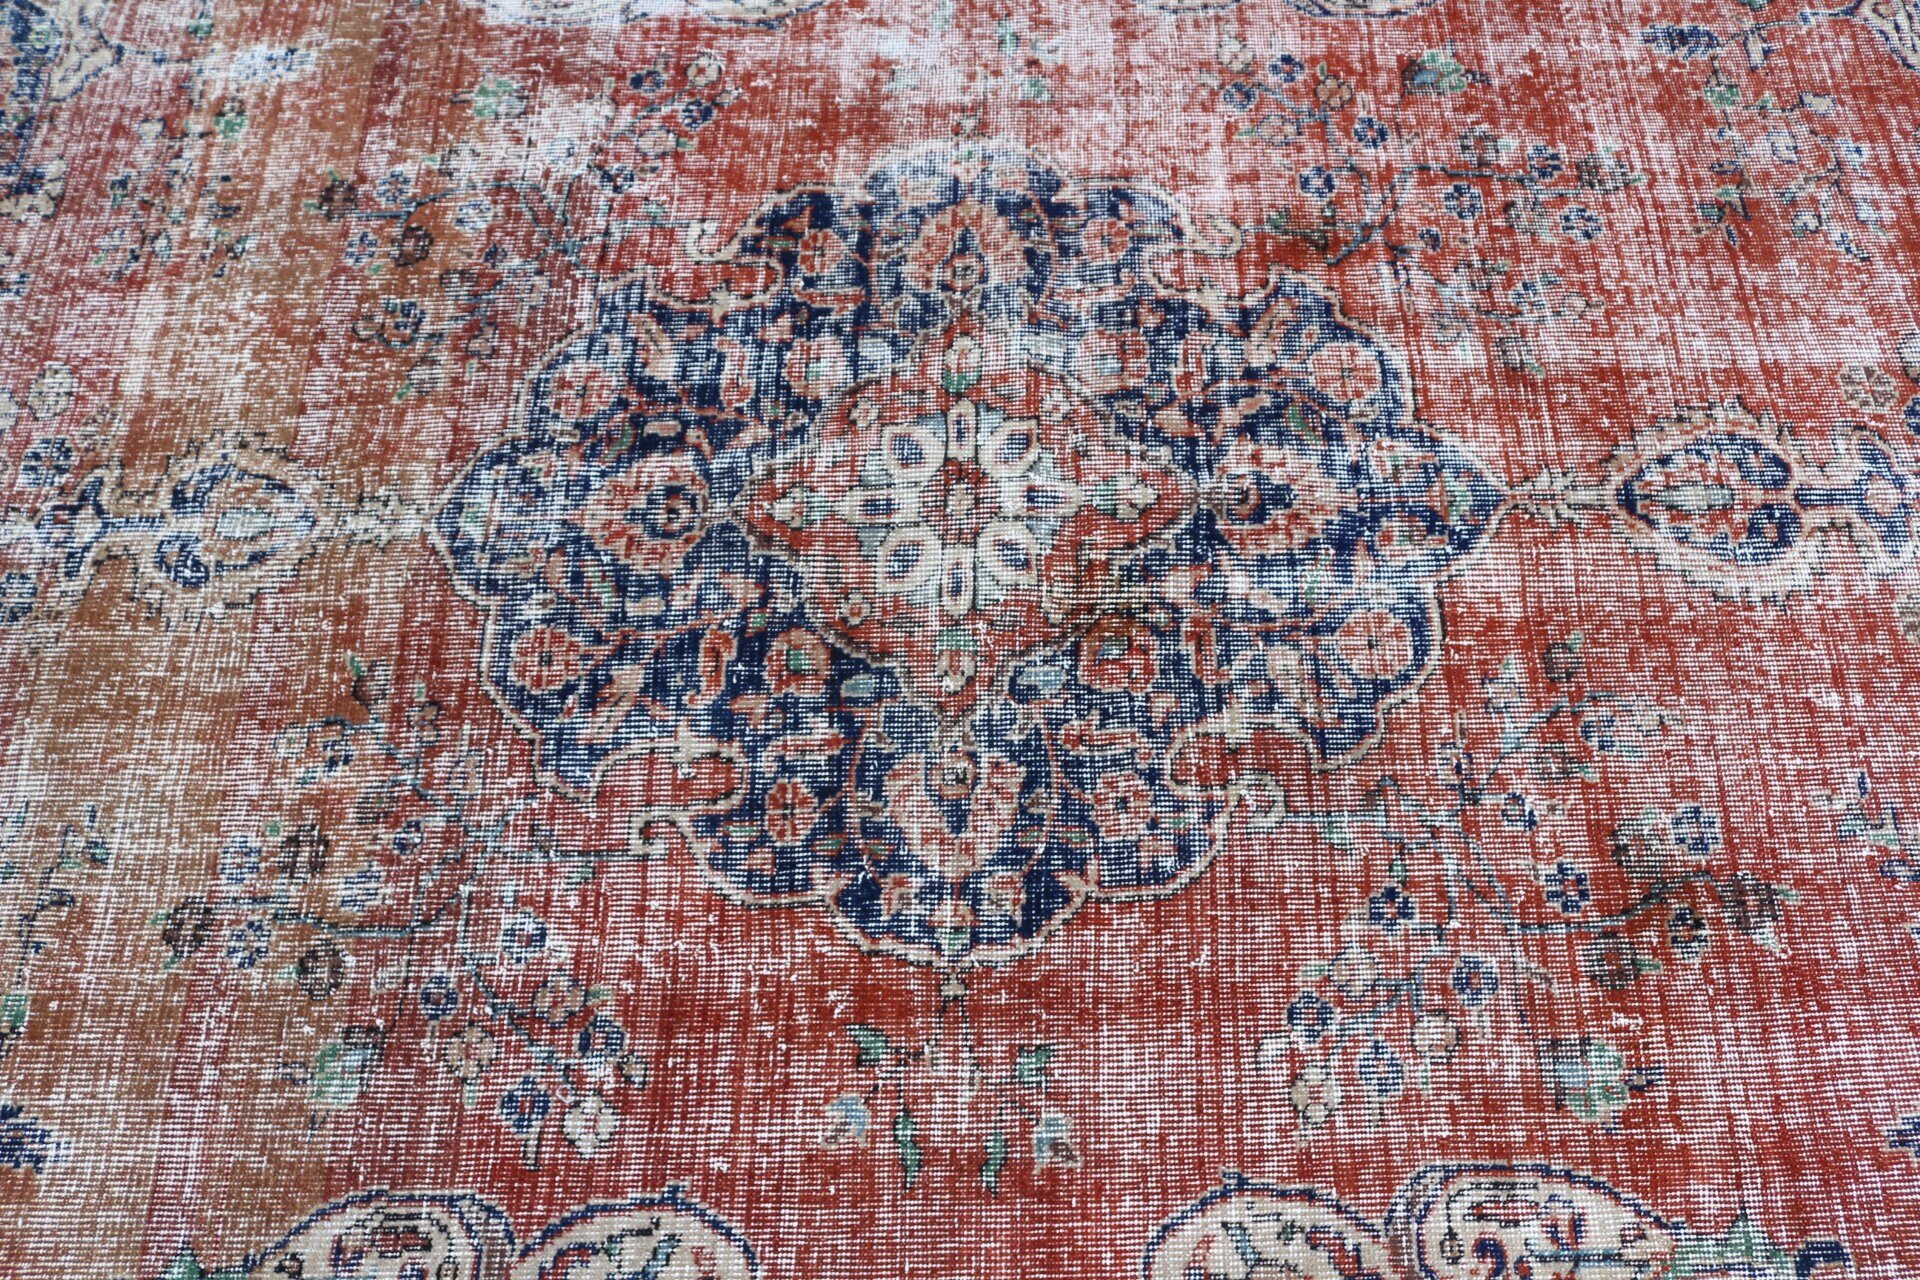 Cool Rugs, Dining Room Rugs, Oriental Rug, Vintage Rug, Red Home Decor Rug, Turkish Rugs, Kitchen Rugs, Pale Rugs, 4.6x7.8 ft Area Rug